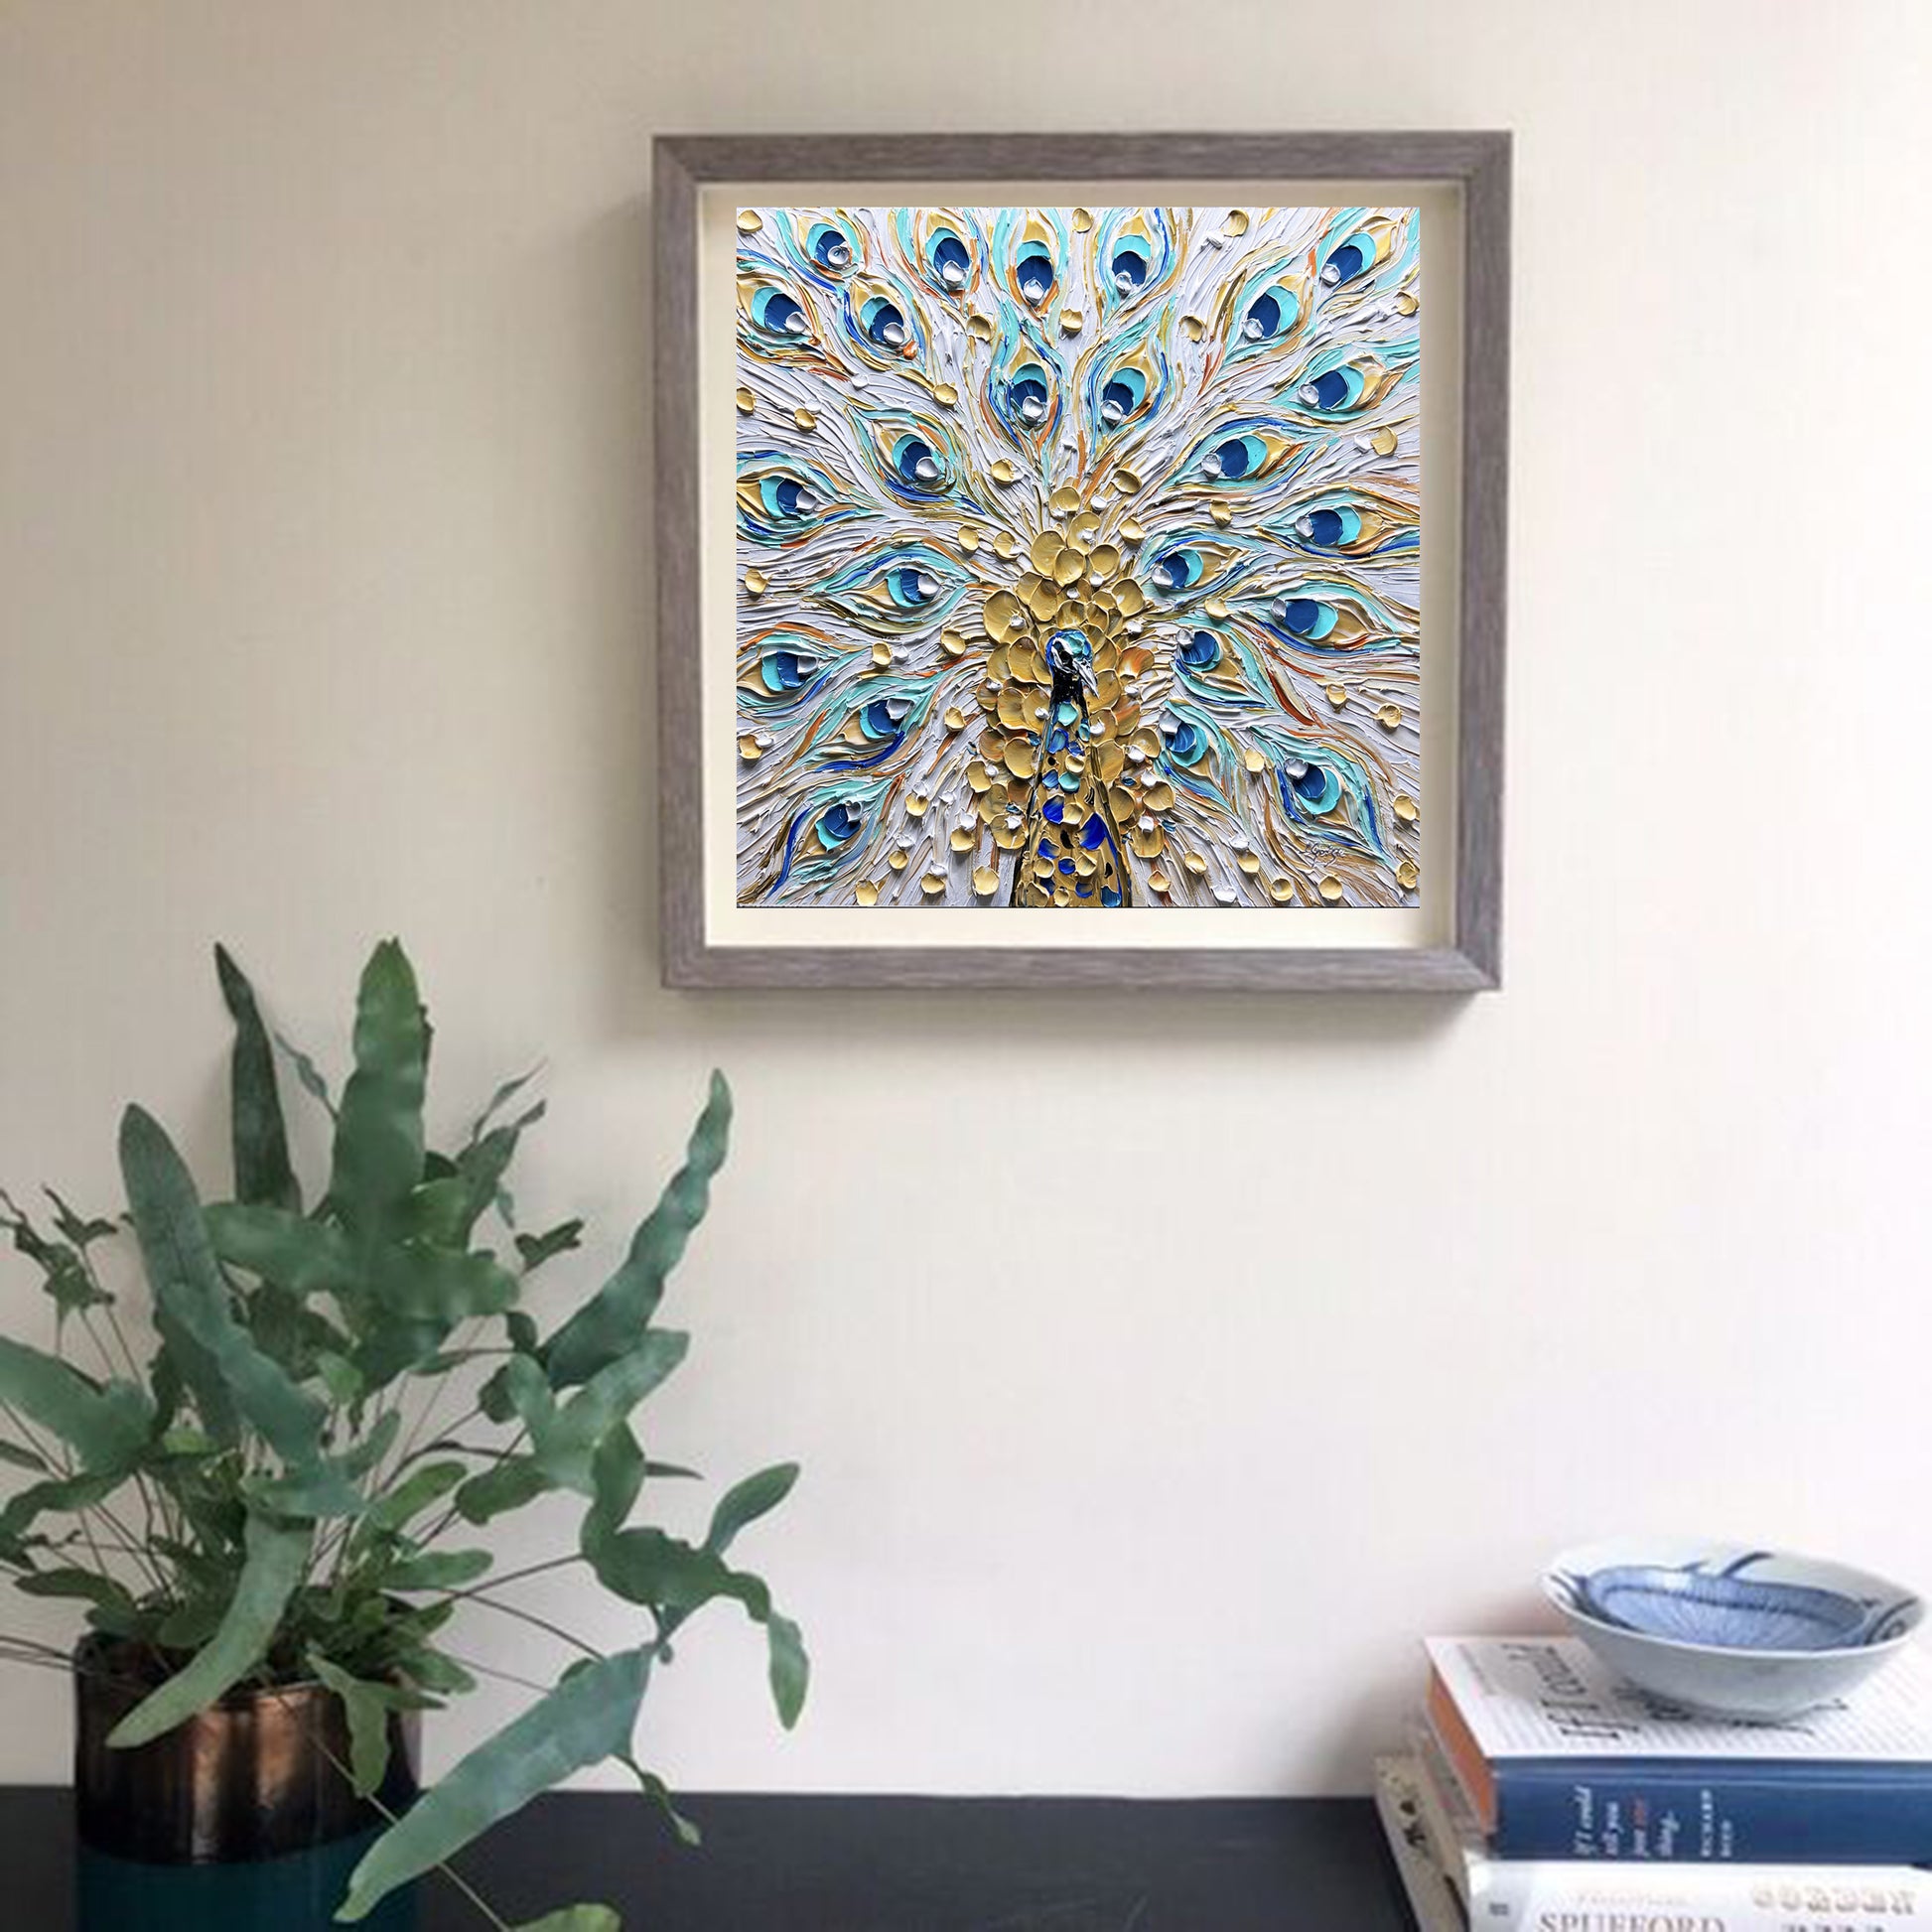 a picture of a peacock is hanging on a wall